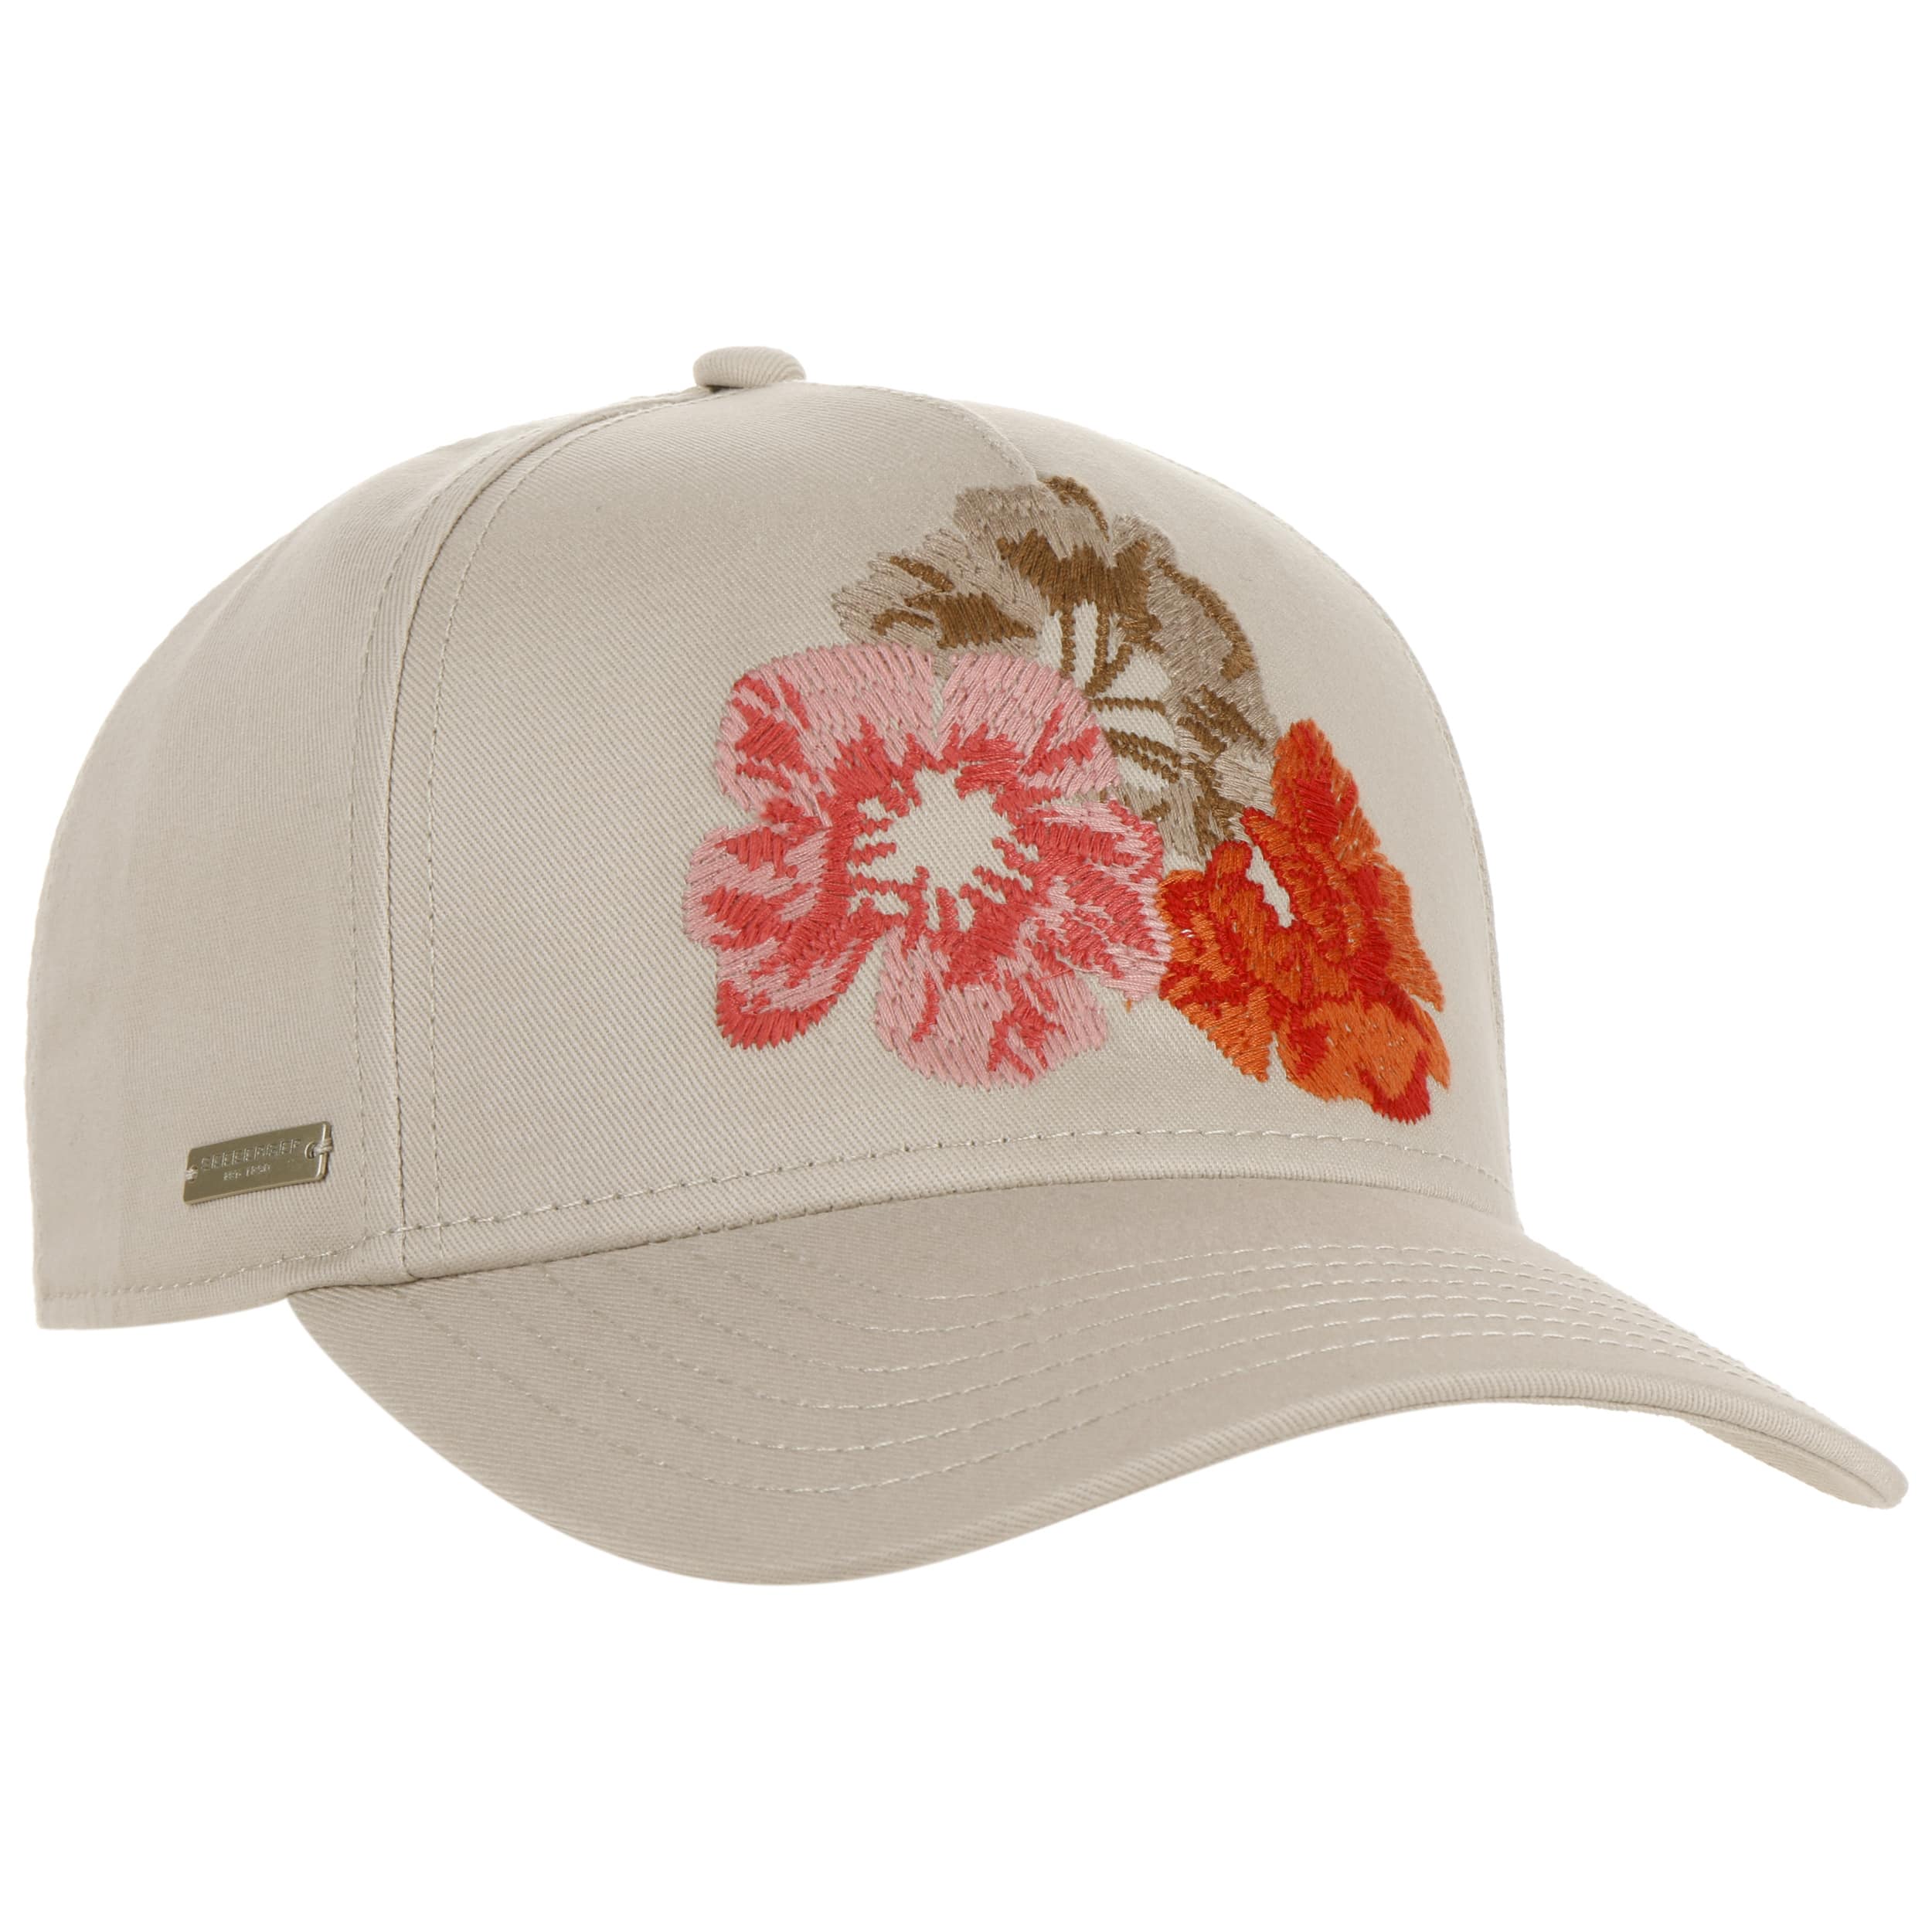 29,95 Cap by Flowers Stitched Seeberger € -